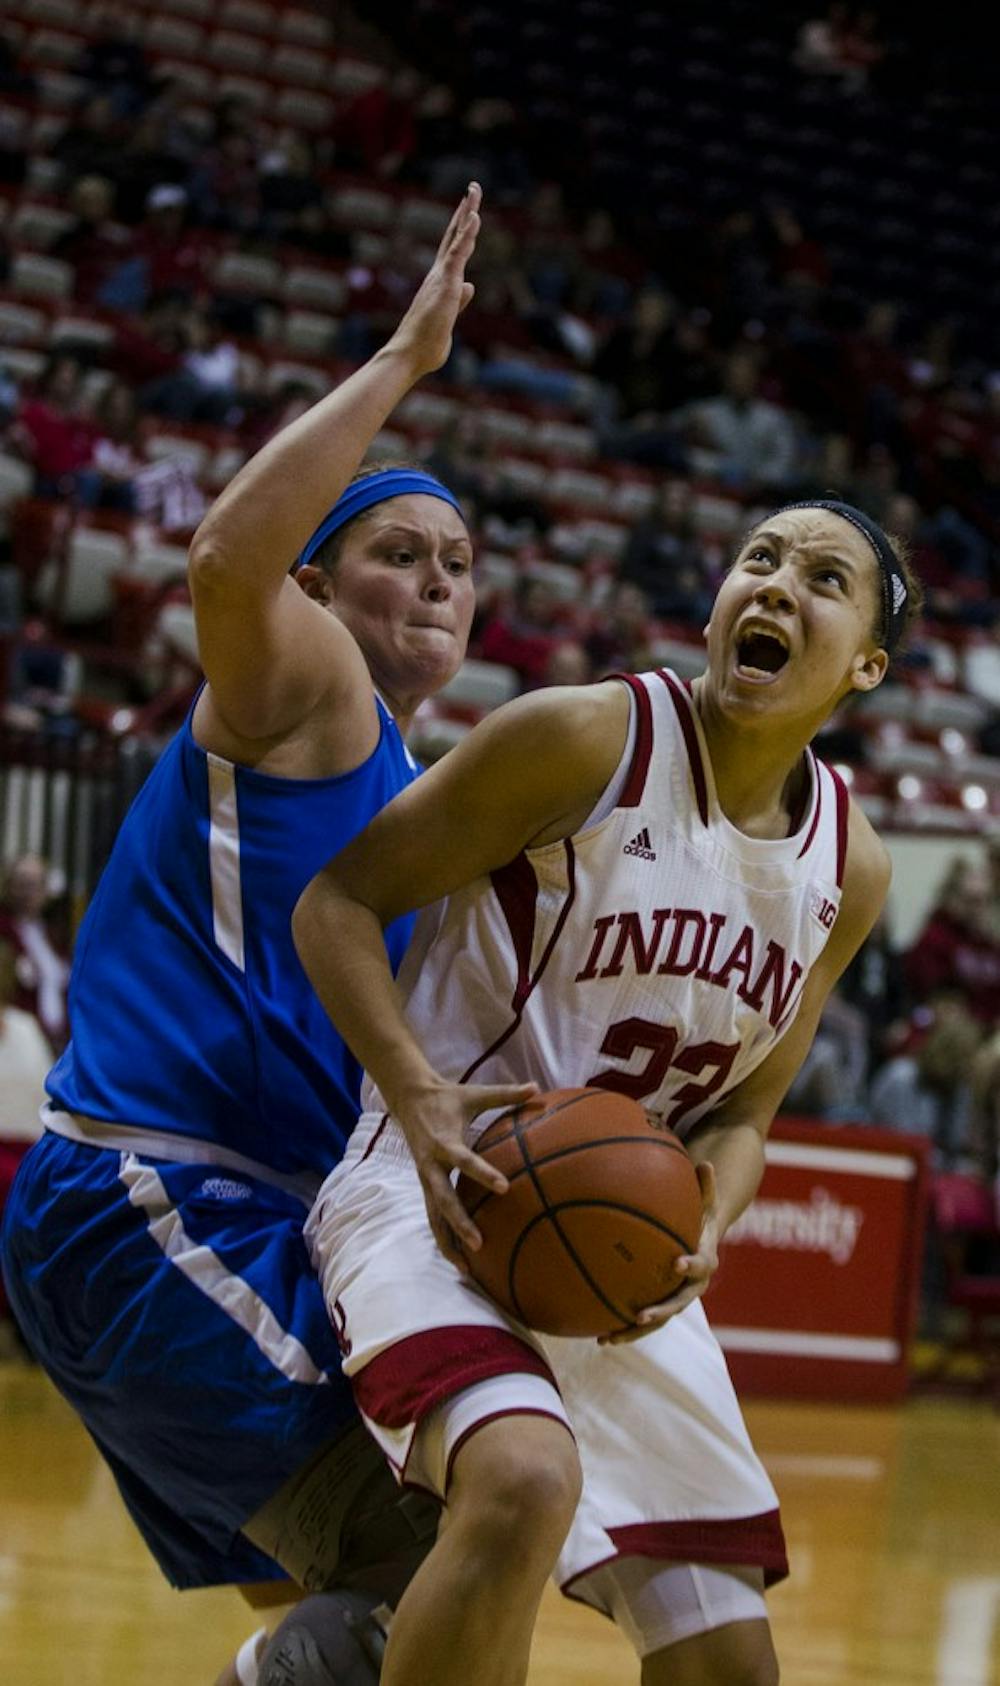 Sophomore guard Alexis Gassion attempts to get free for a shot during the Hoosier's game against the Mastodons on Wednesday at Assembly Hall. The Hoosier won 80-37 and advanced to 8-1.